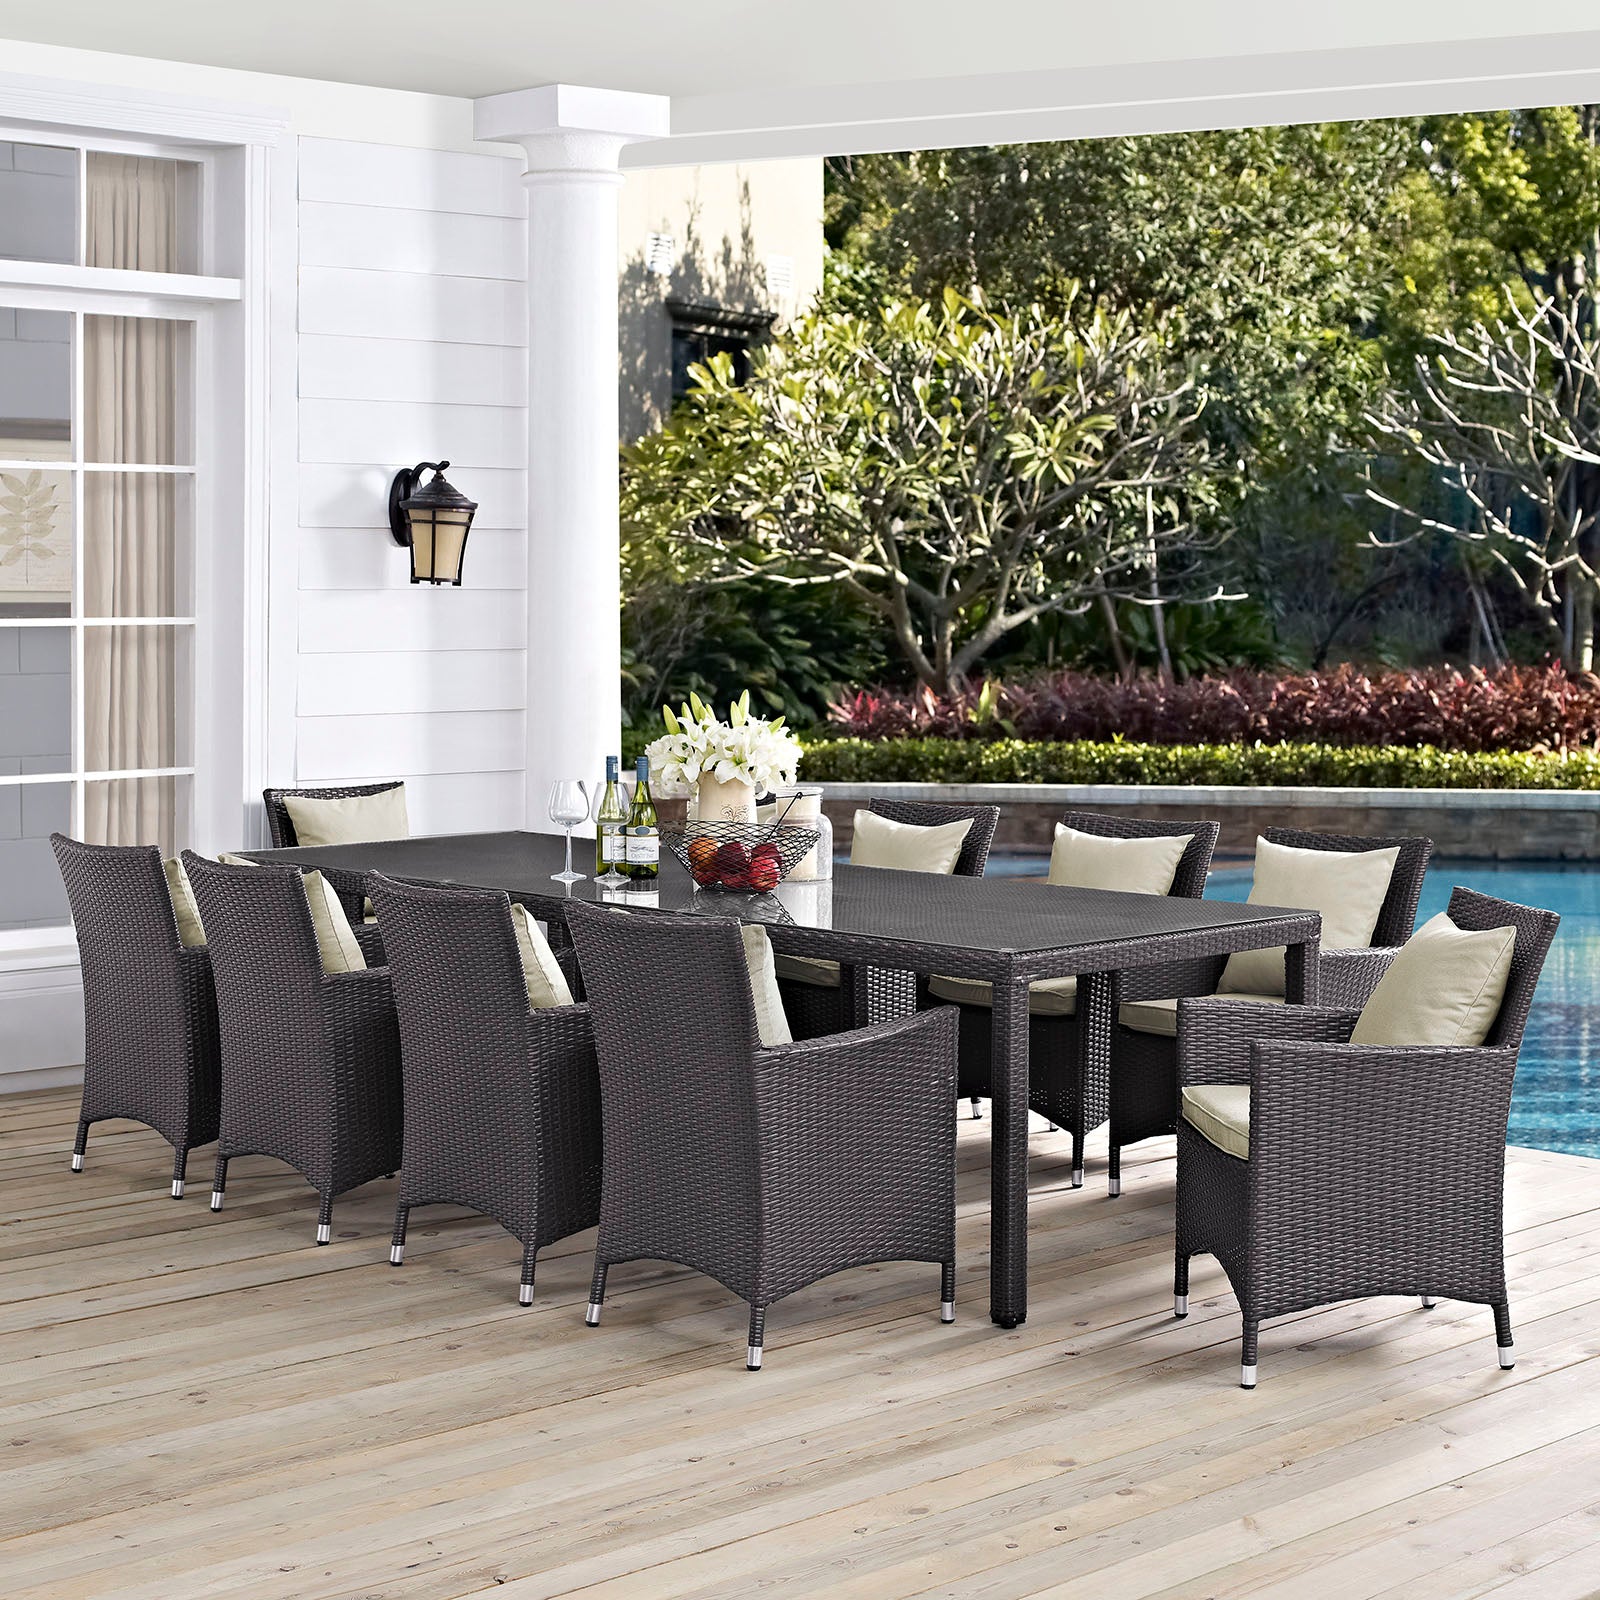 Convene 11 Piece Outdoor Patio Dining Set - East Shore Modern Home Furnishings